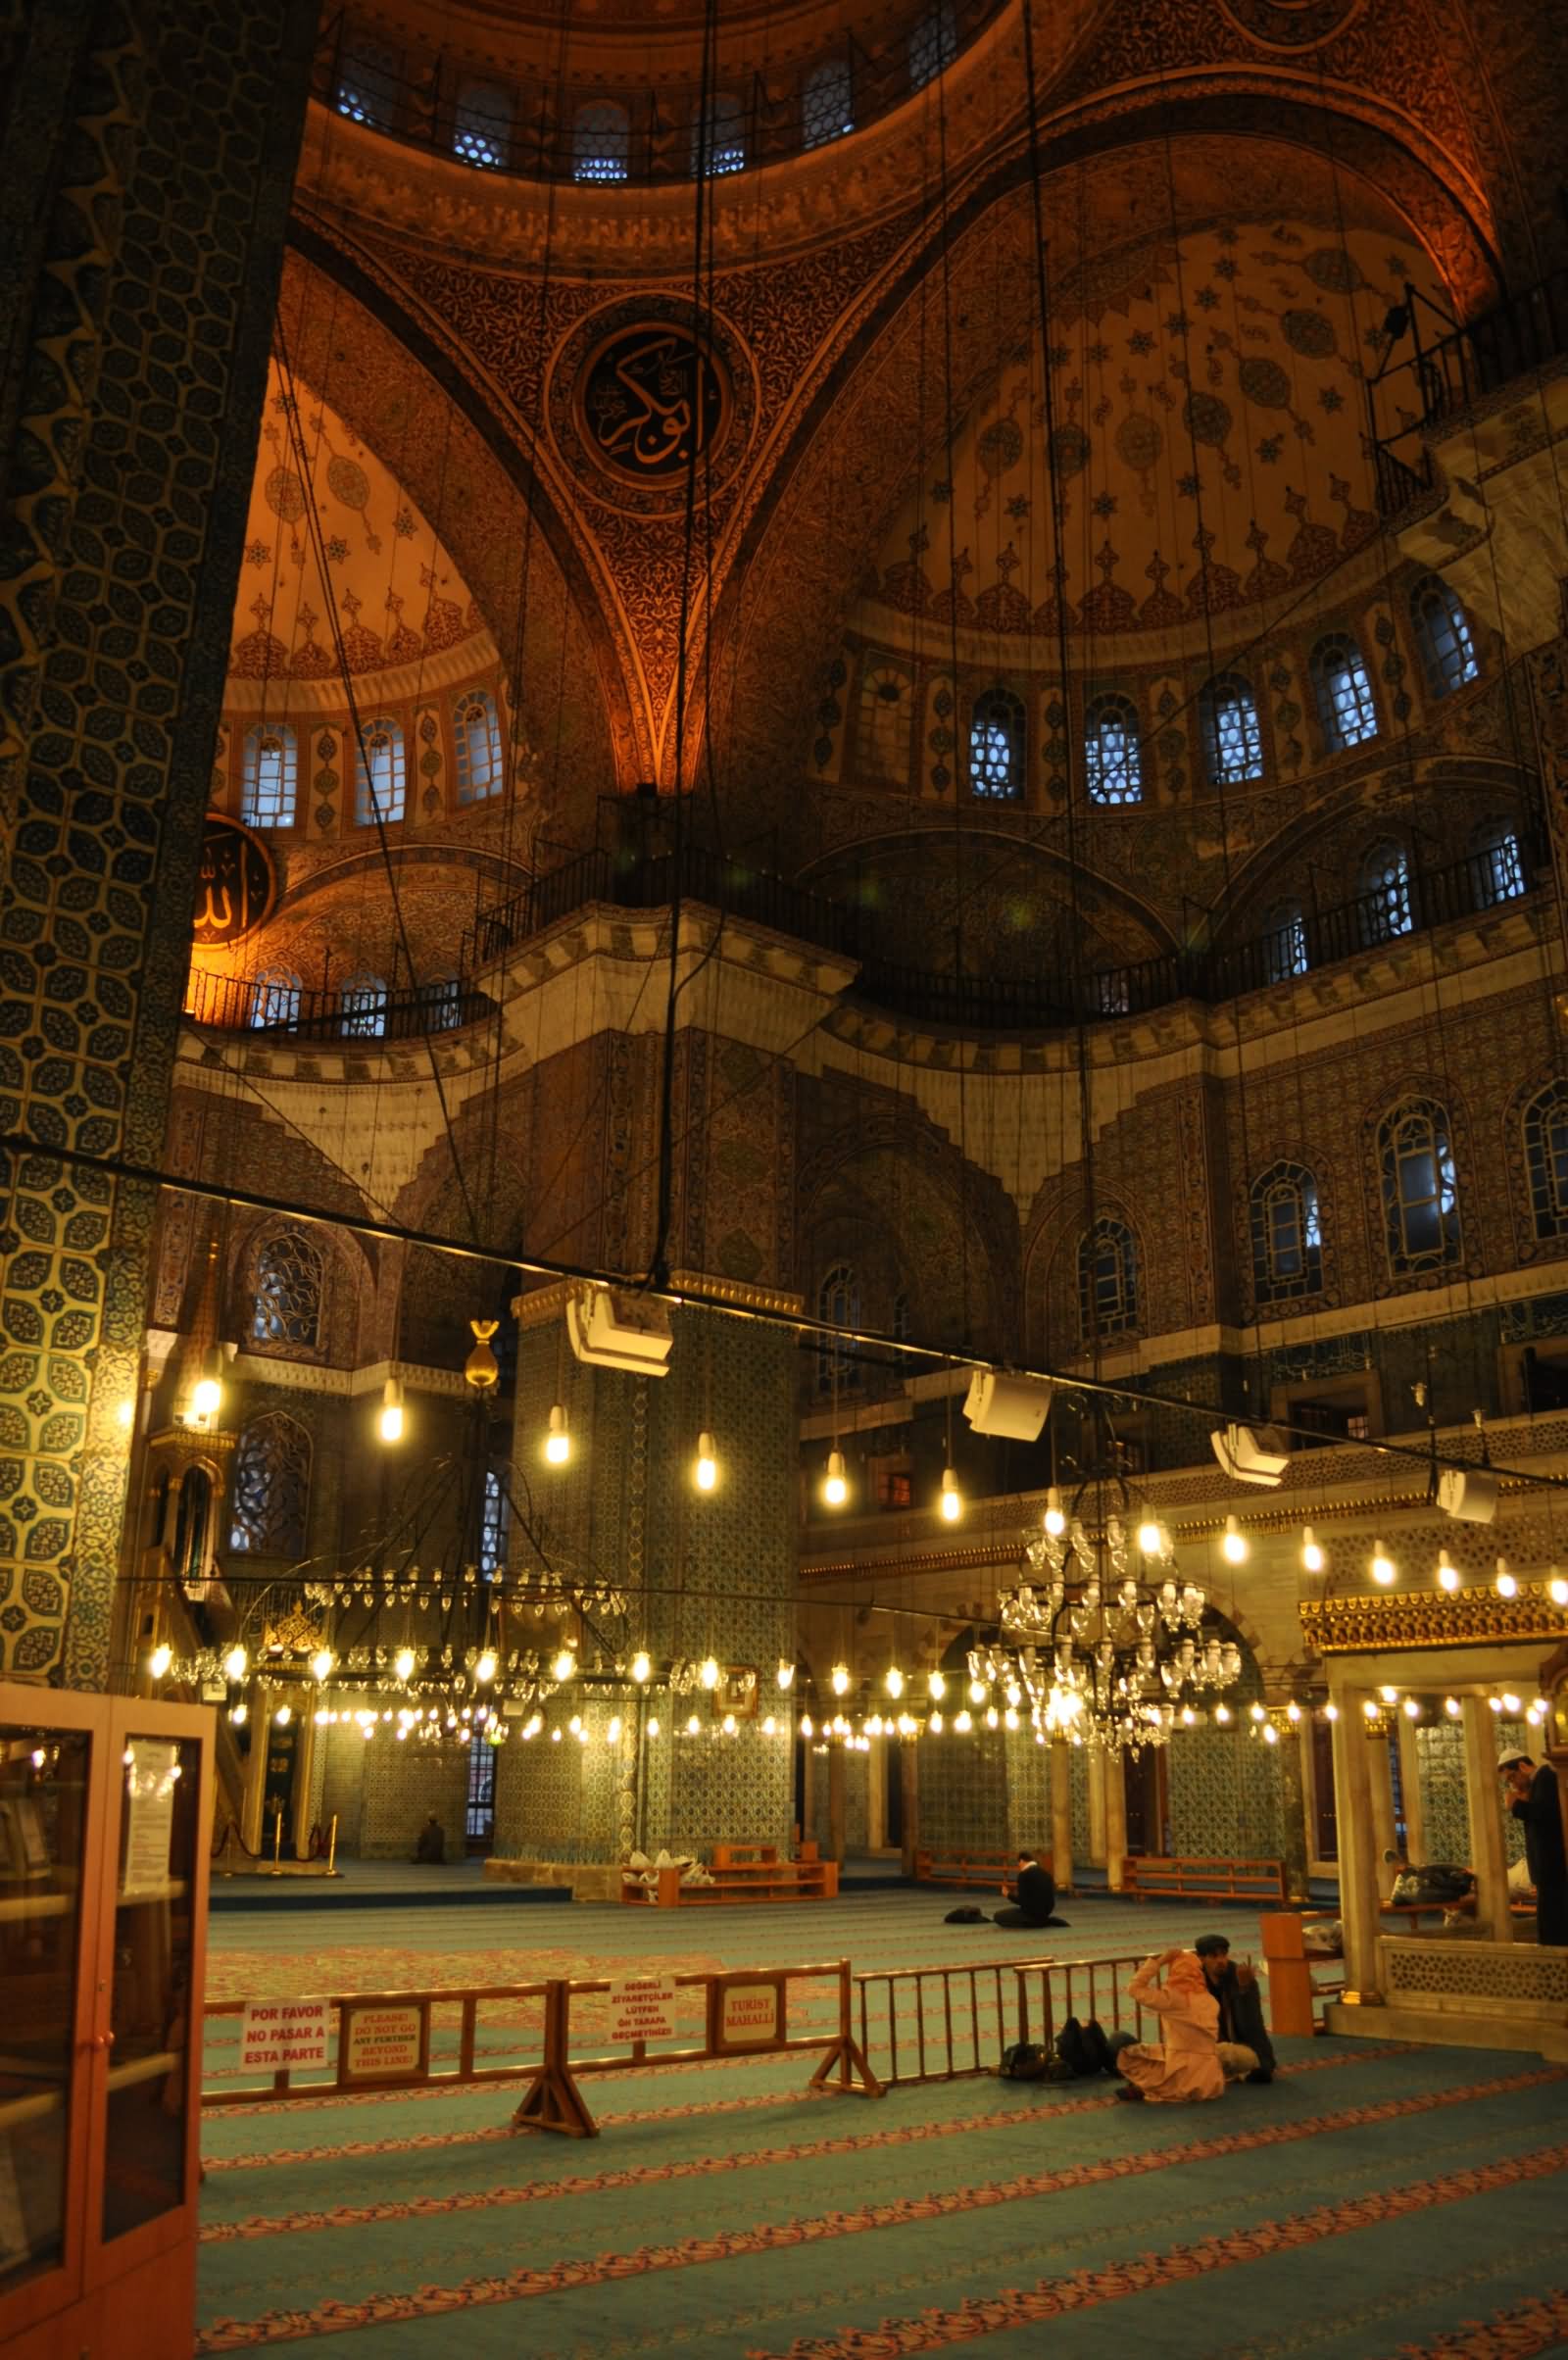 Inside Image of The Yeni Cami In Istanbul